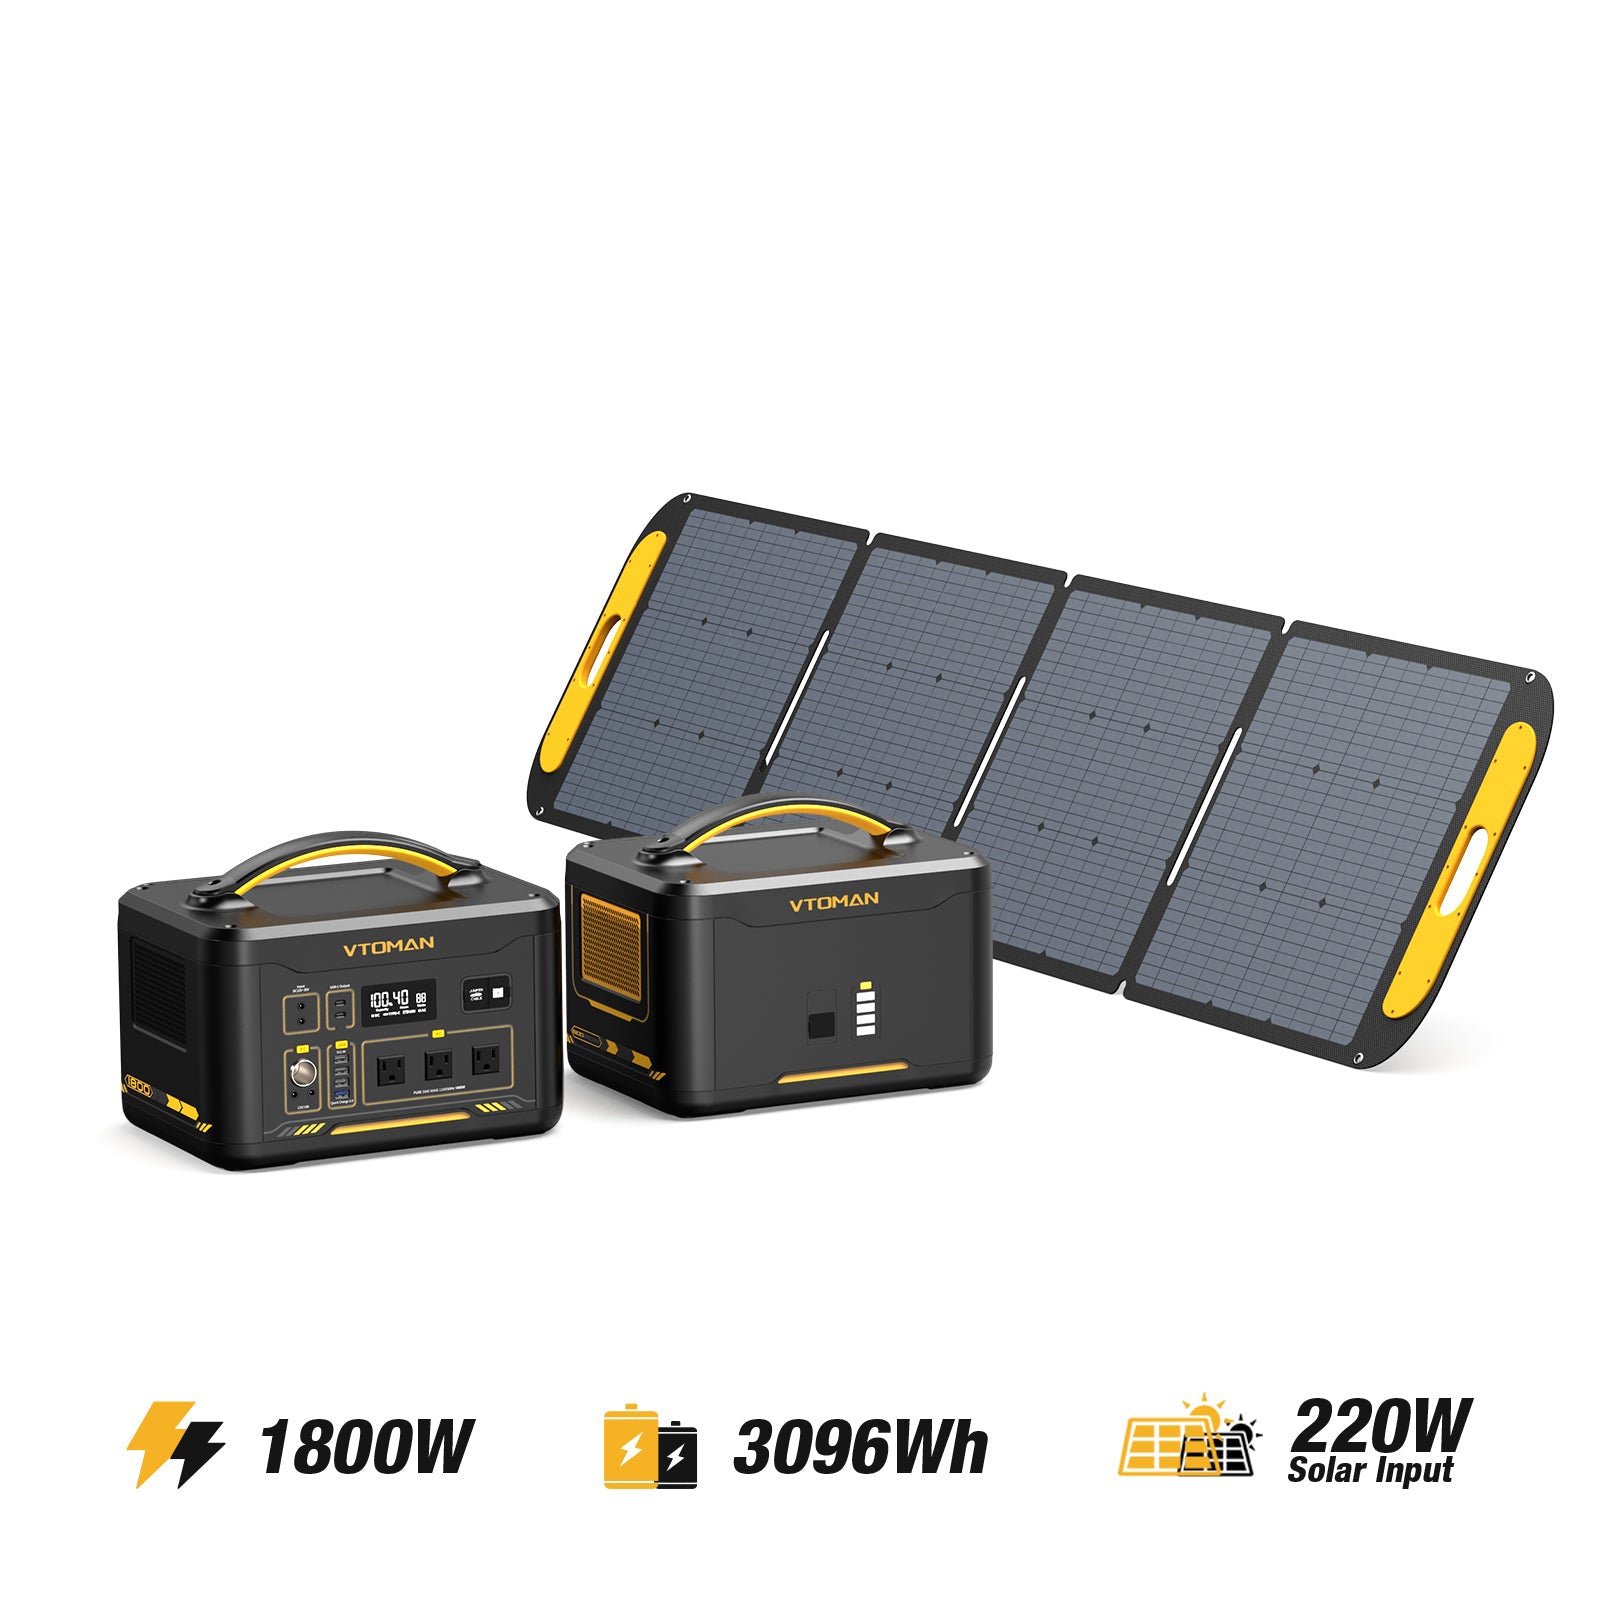 jump 1800 power station -AC 1800W-1548wh extra battery-220W solar panel